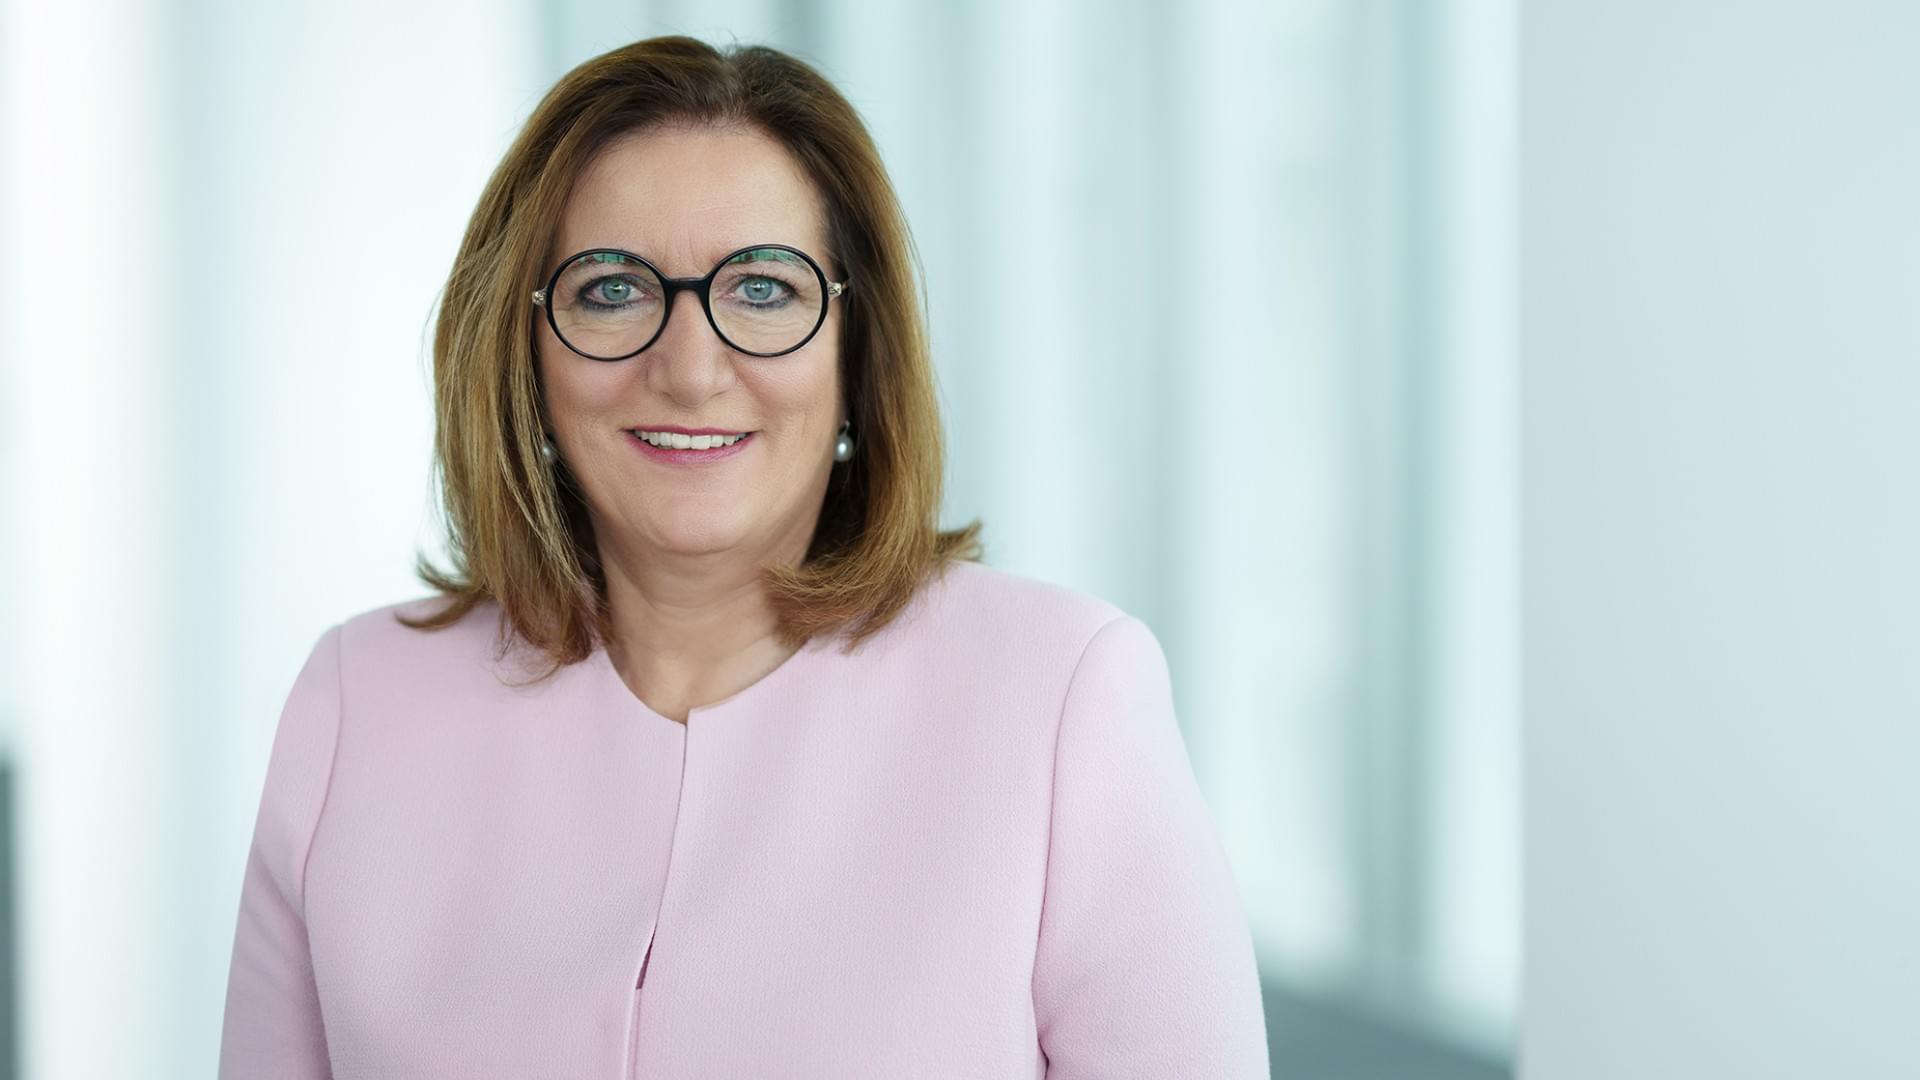 Portrait of Dr. Claudia Mayfeld, Member of the Executive Board for Integrity, Legal and Human Resources at Knorr-Bremse AG